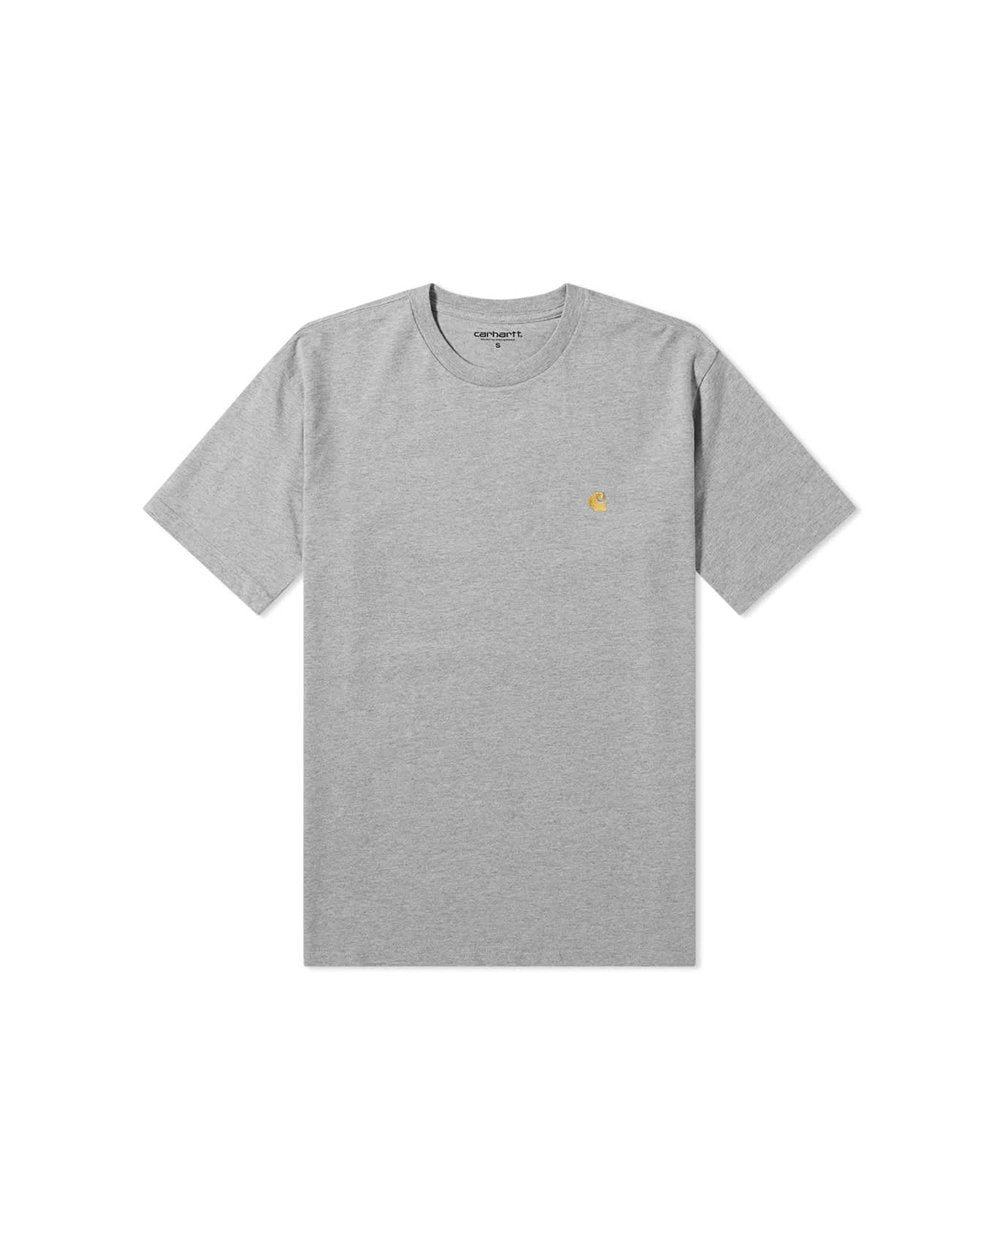 Chase T-Shirt - Grey Heather / Gold